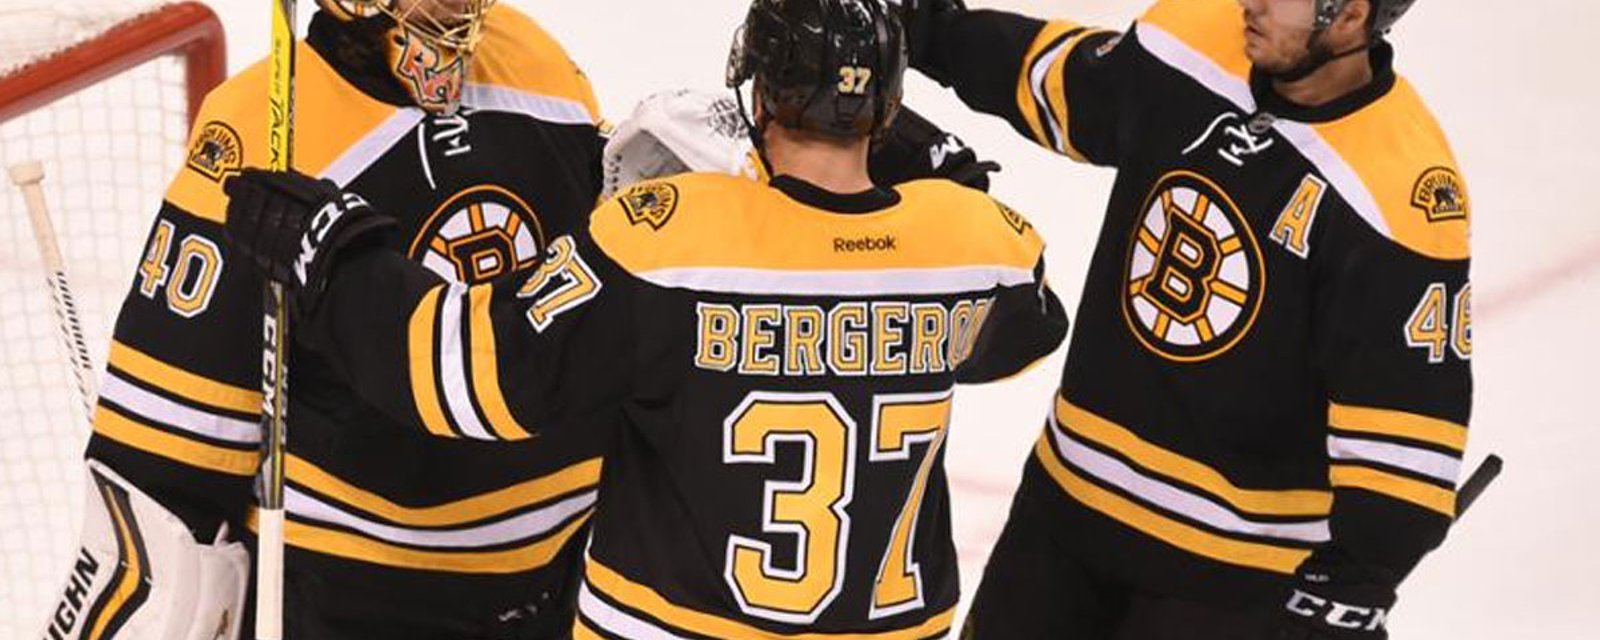 Breaking: Things are getting much worse for the Bruins! 